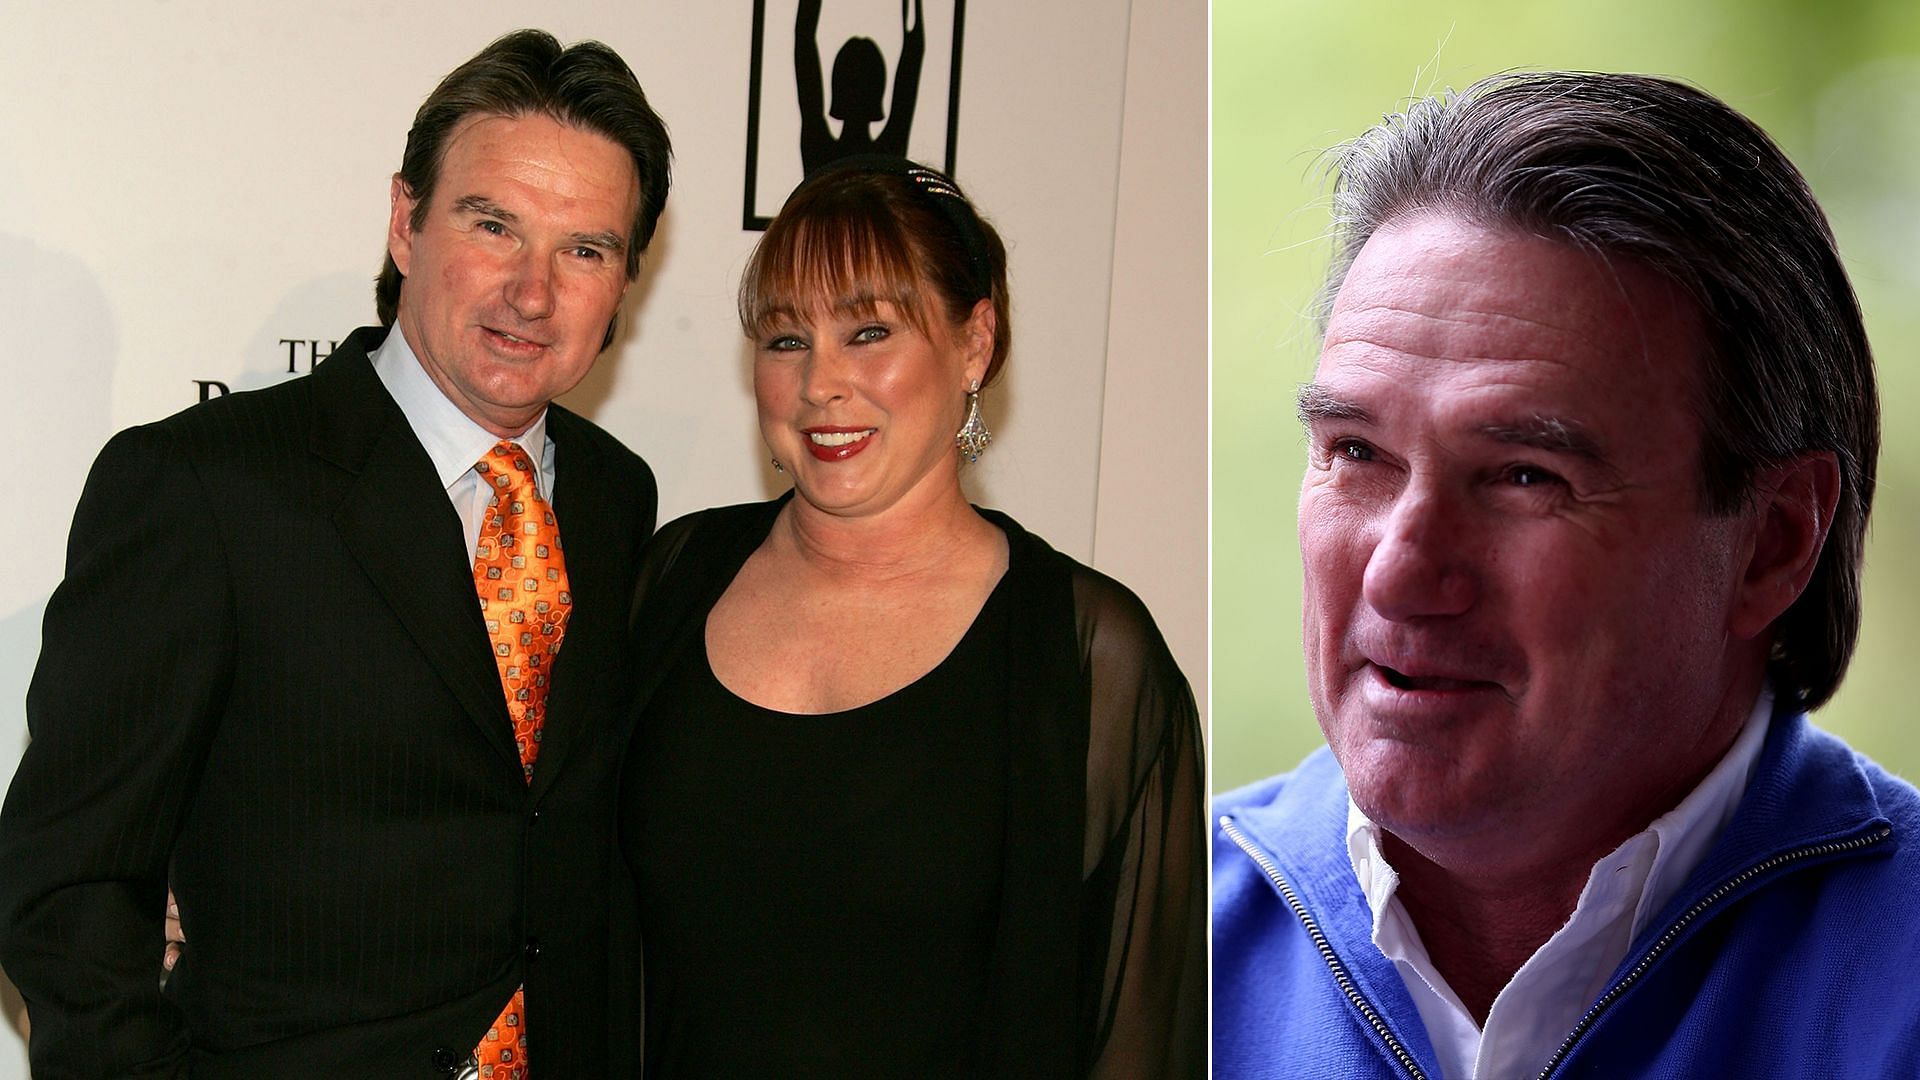 Jimmy connors patti mcguire